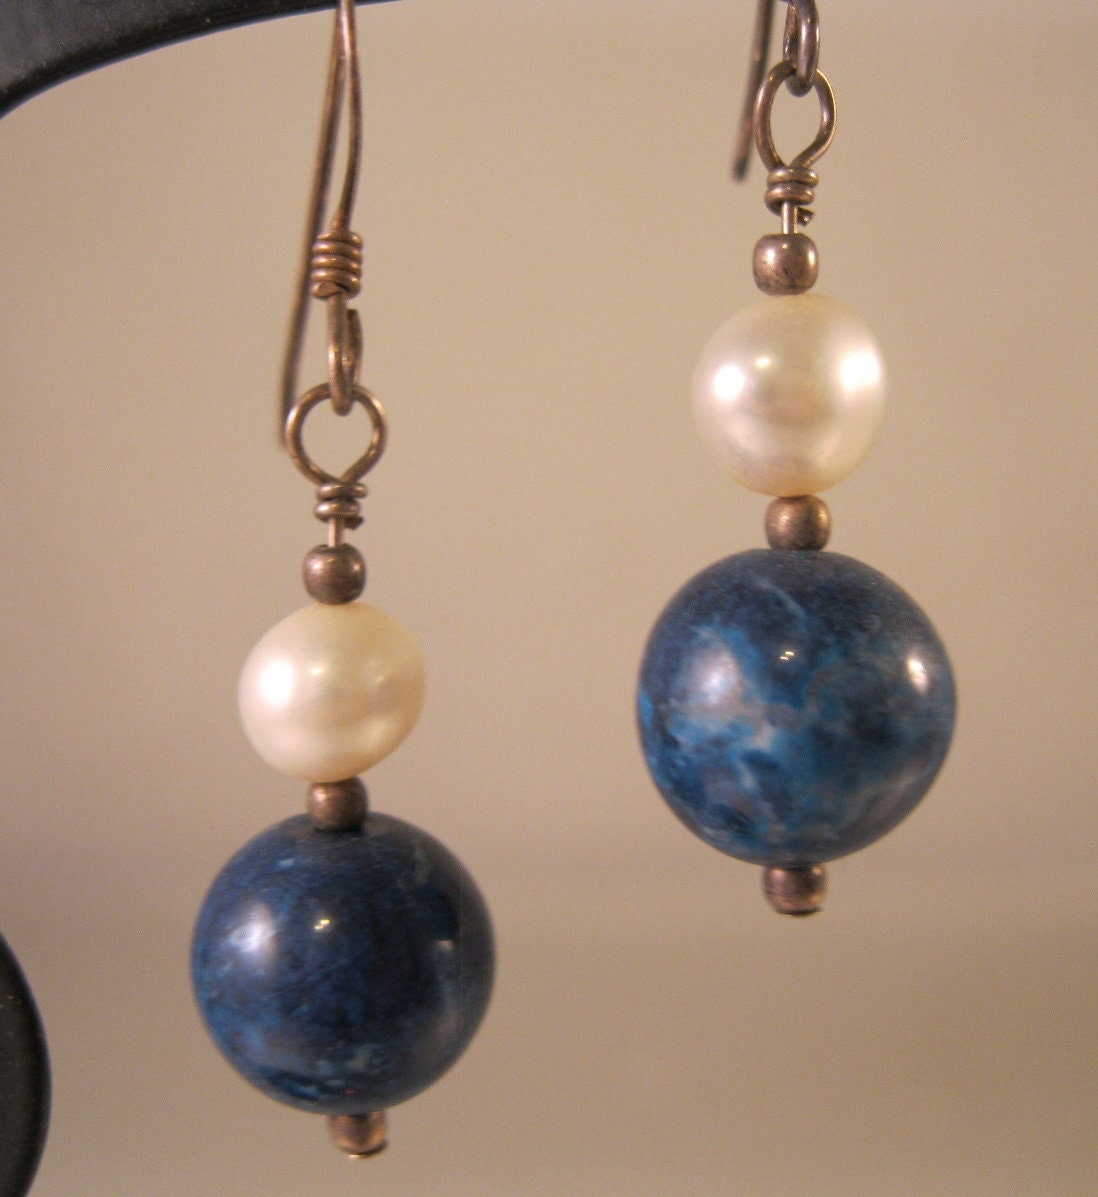 Details about   Sterling Silver Carved SODALITE Star w/ PEARL Dangle Earrings #77...Handmade USA 